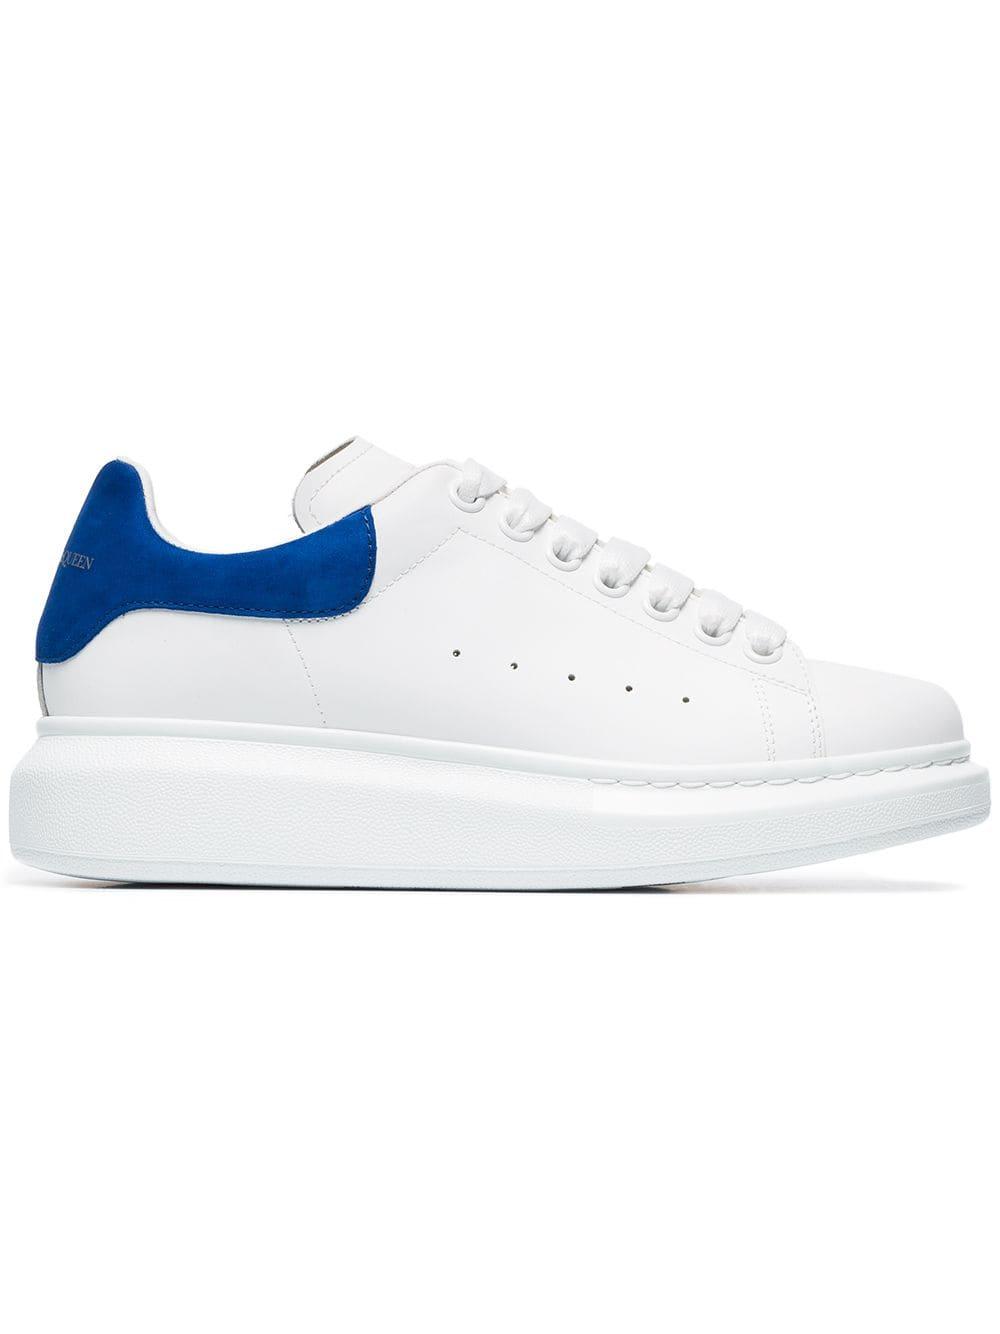 Alexander McQueen Leather Oversized Sneakers in White - Lyst